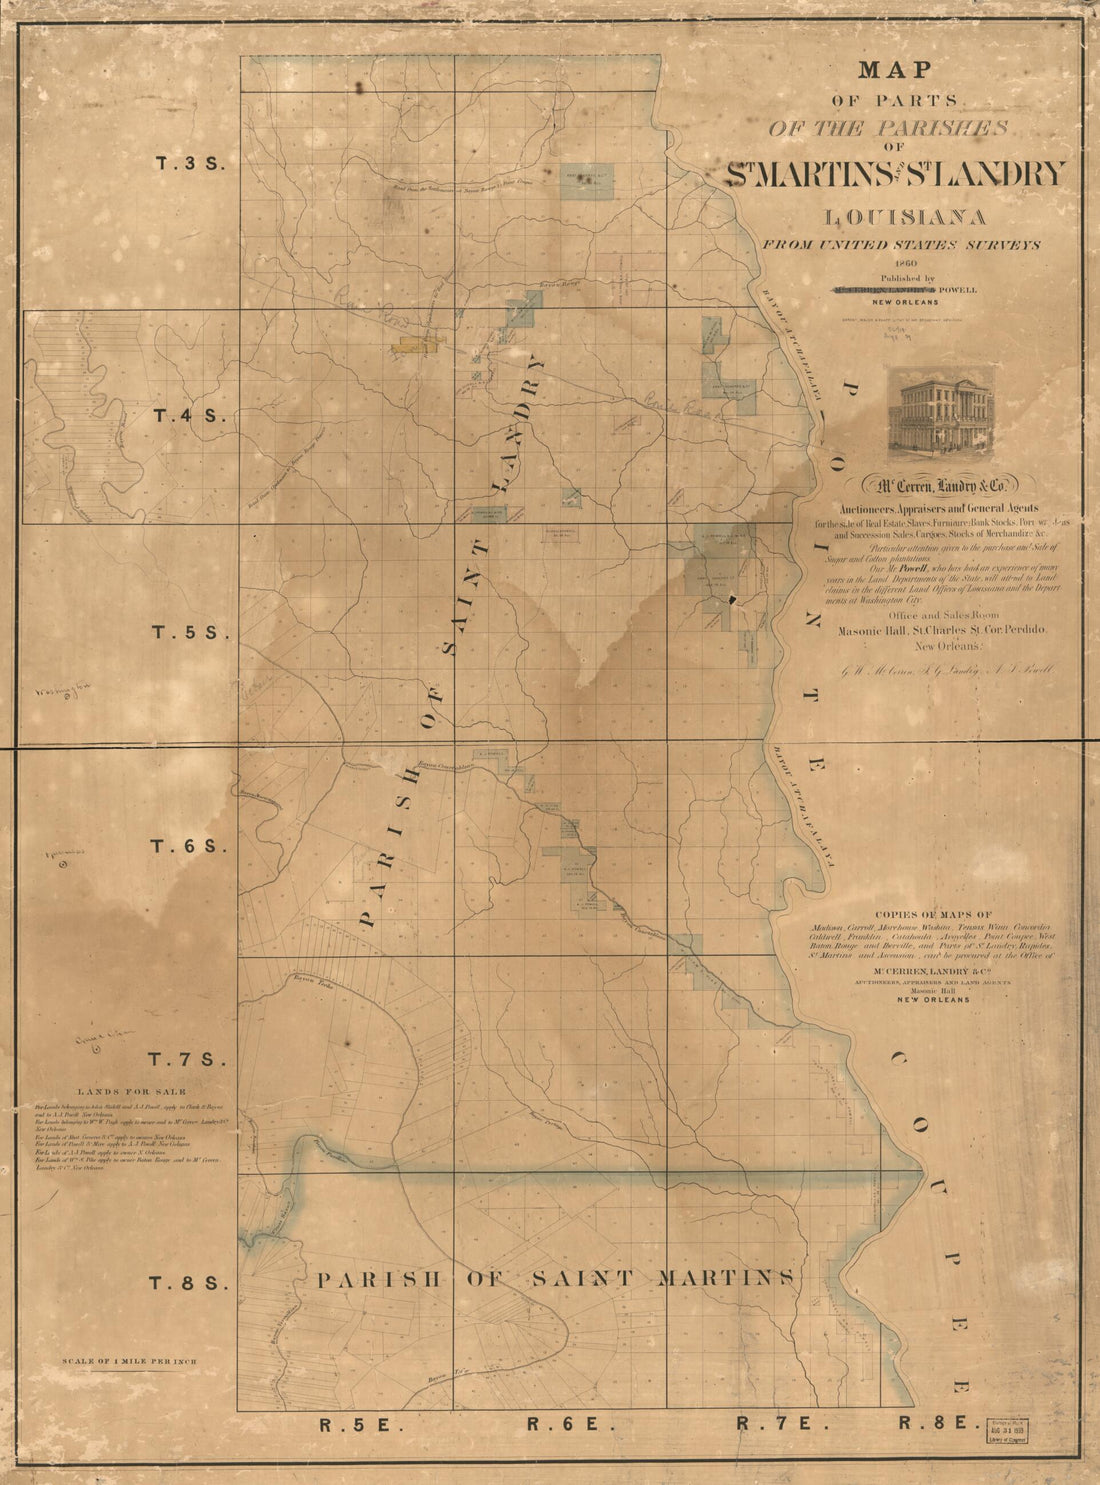 This old map of Map of Parts of the Parishes of St. Martins and St. Landry, Louisiana : from United States Surveys from 1860 was created by Landry &amp; Powell McCerren in 1860